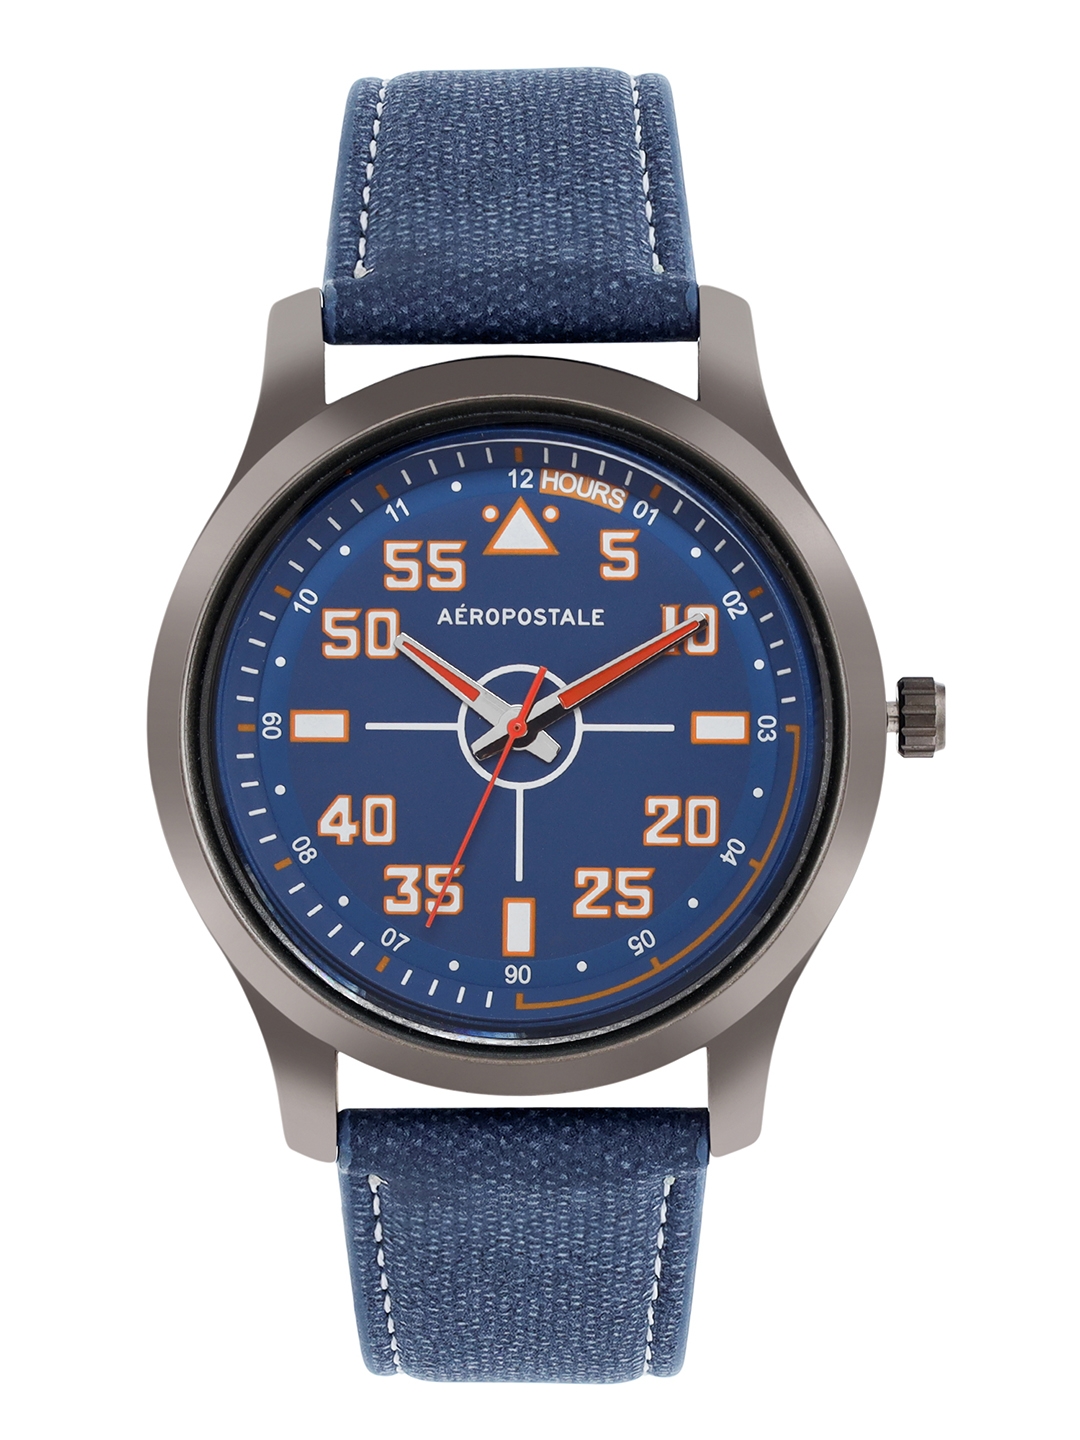 Aeropostale "AERO_AW_A34_BLU" Classic Men’s Analog Quartz Wrist Watch, Metal Alloy Blue case, Blue Dial with contrasting white hand, Contrasting Faux PU Leather Navy Blue wrist Band  Water resistant